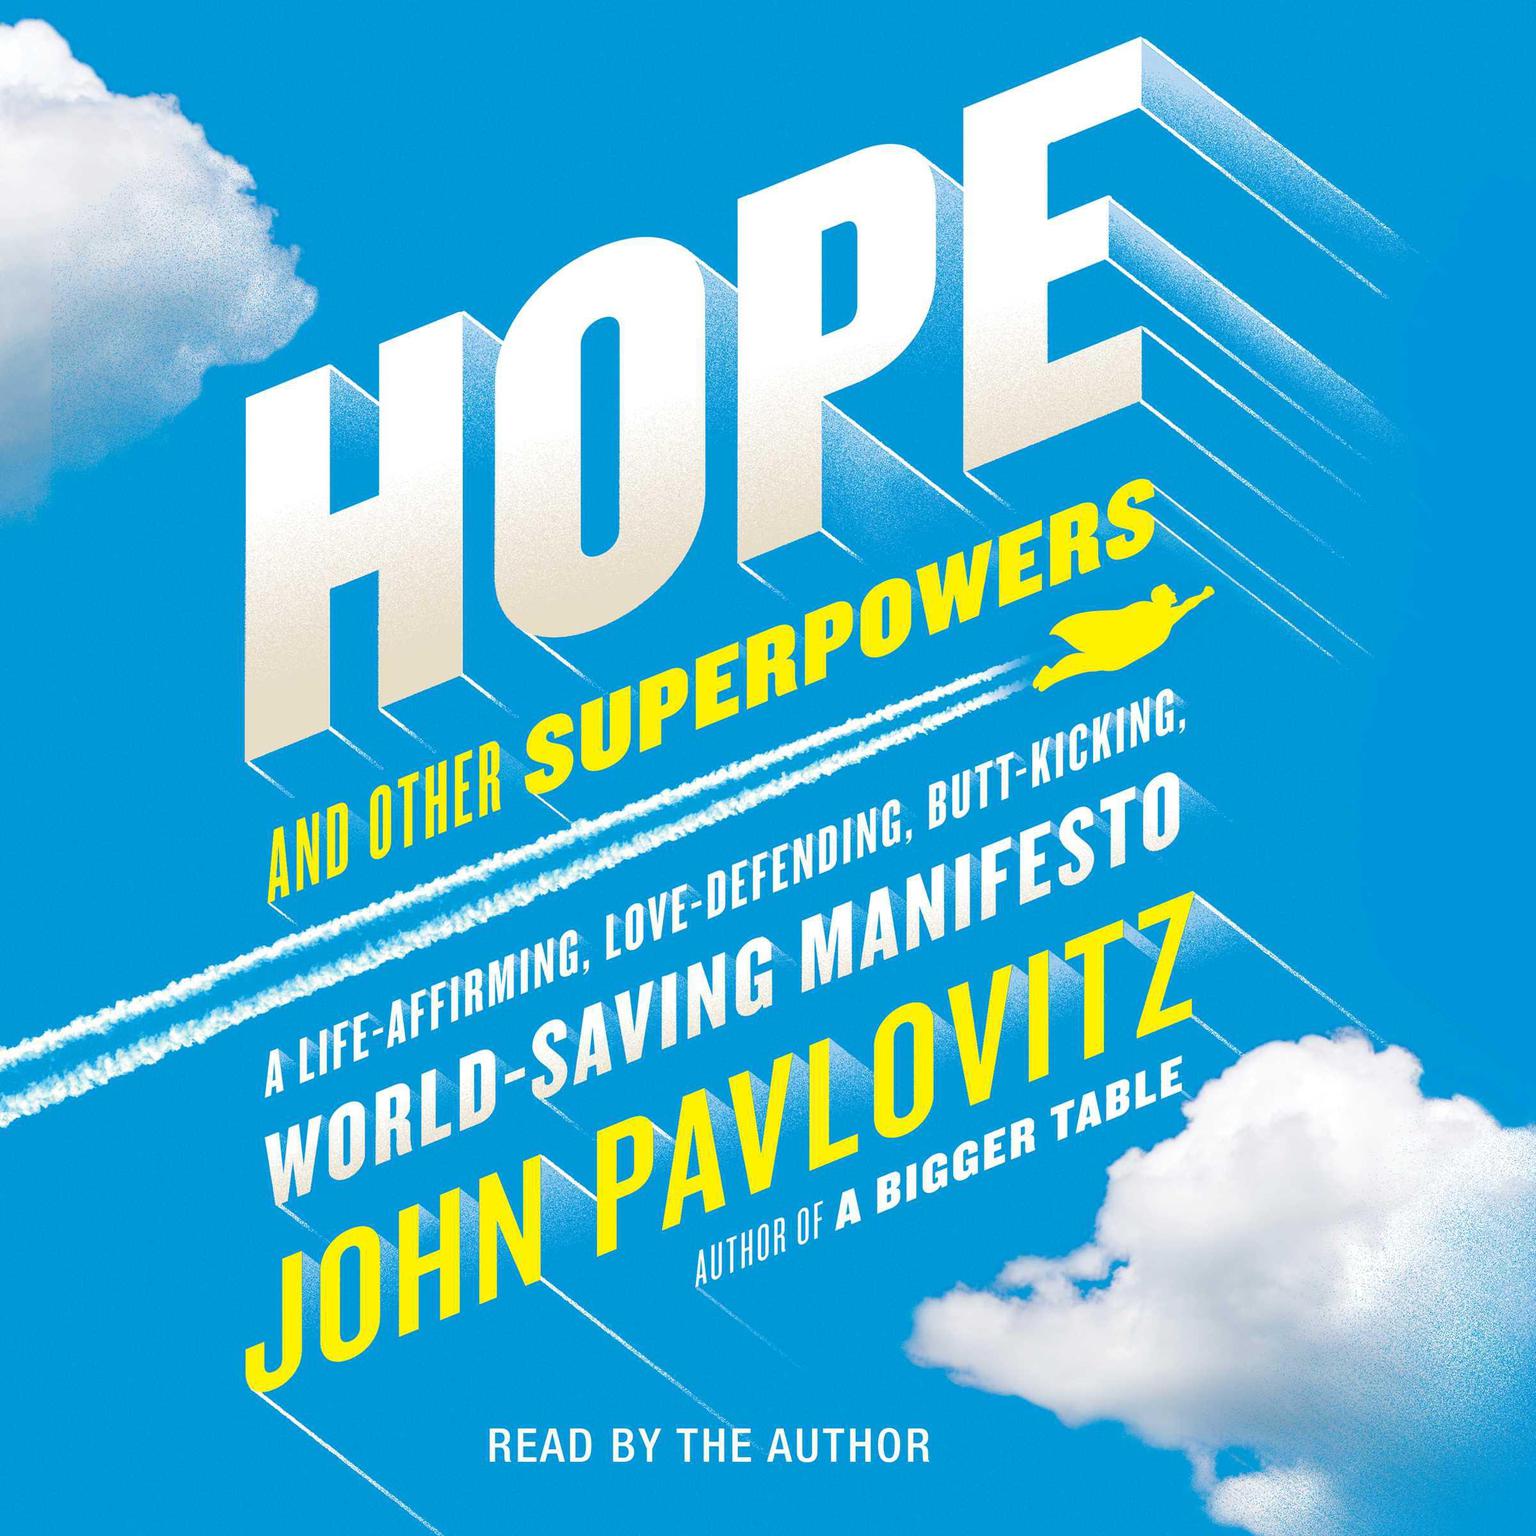 Hope and Other Superpowers: A Life-Affirming, Love-Defending, Butt-Kicking, World-Saving Manifesto Audiobook, by John Pavlovitz